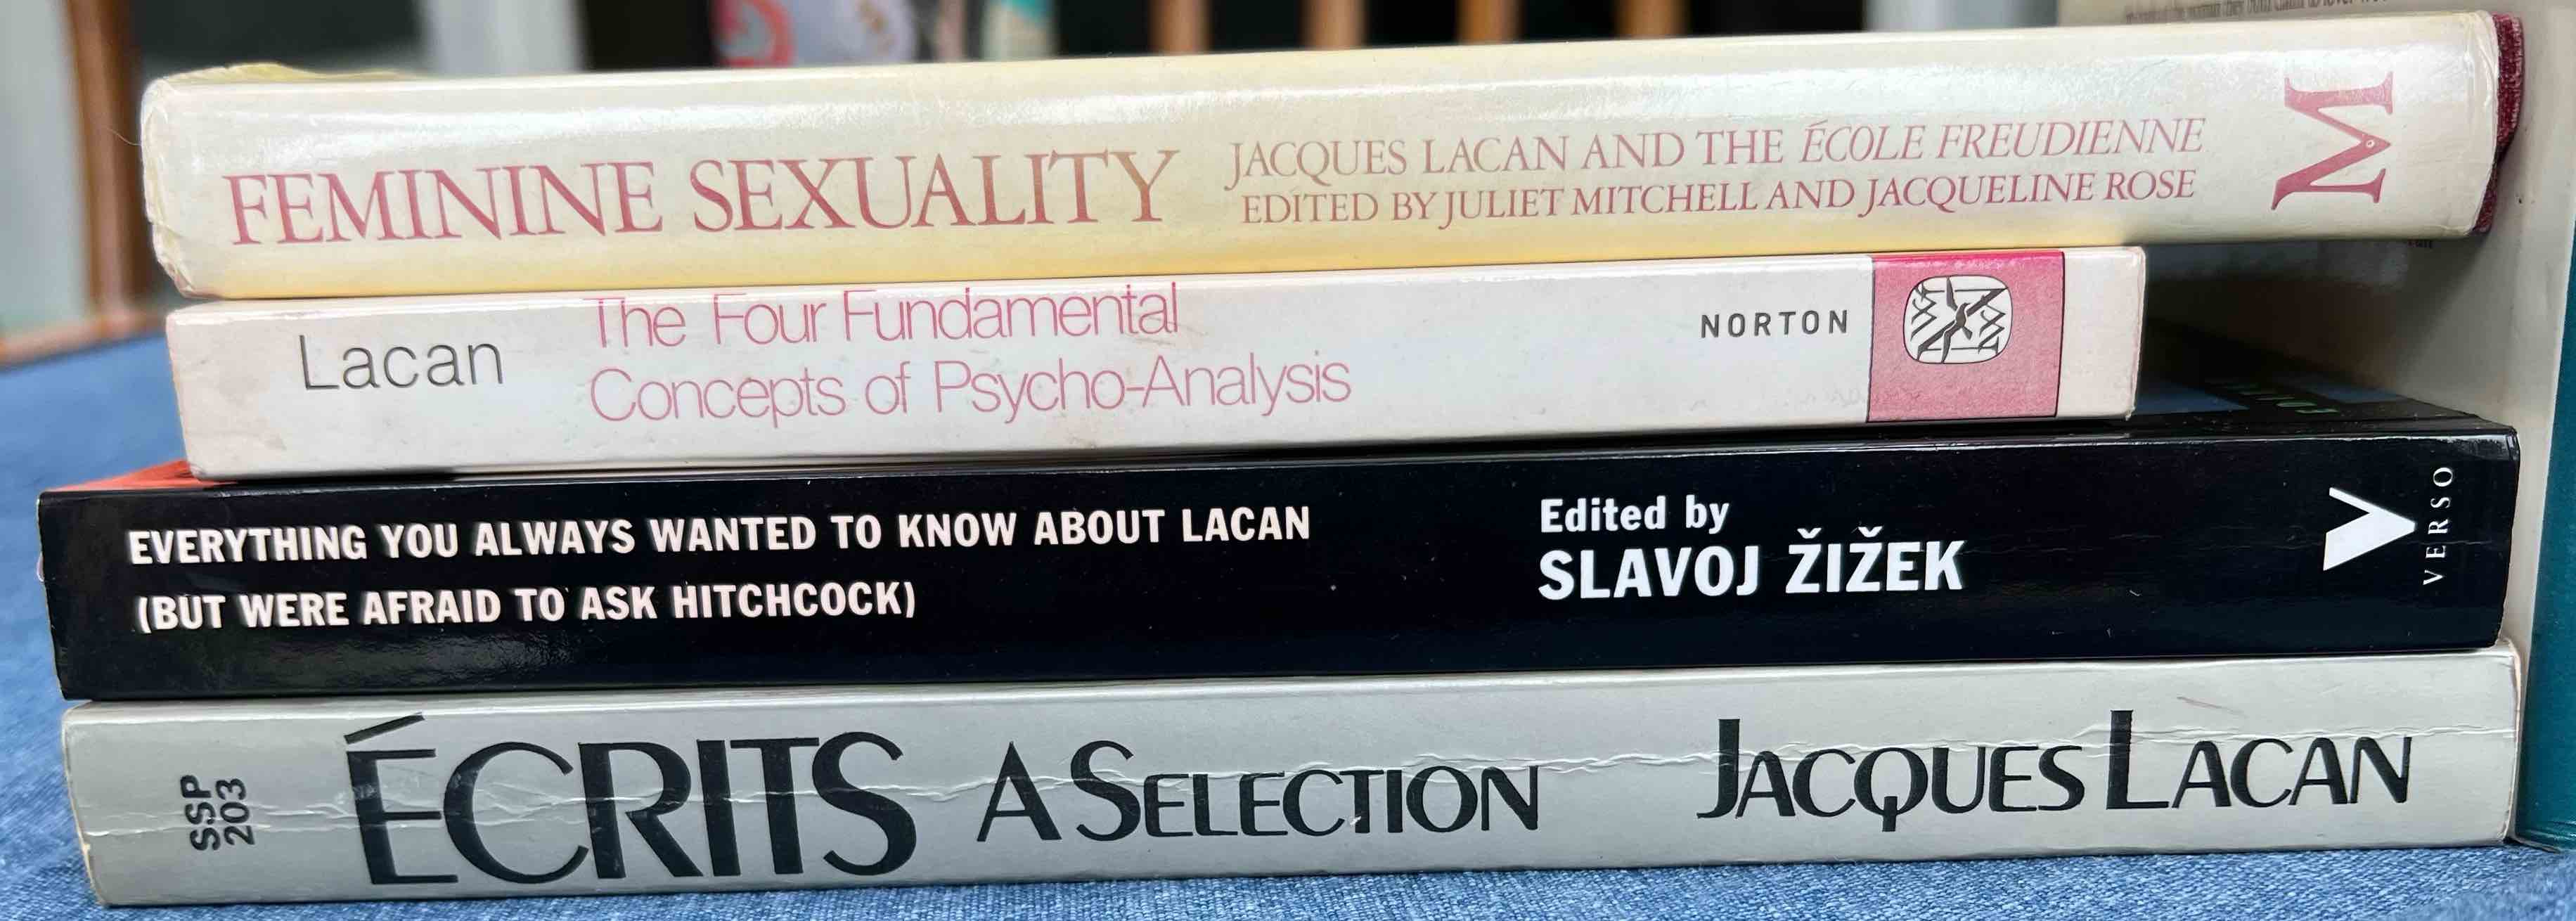 Variety of books by Jacques Lacan, and about Jacques Lacan by Jacqueline Rose